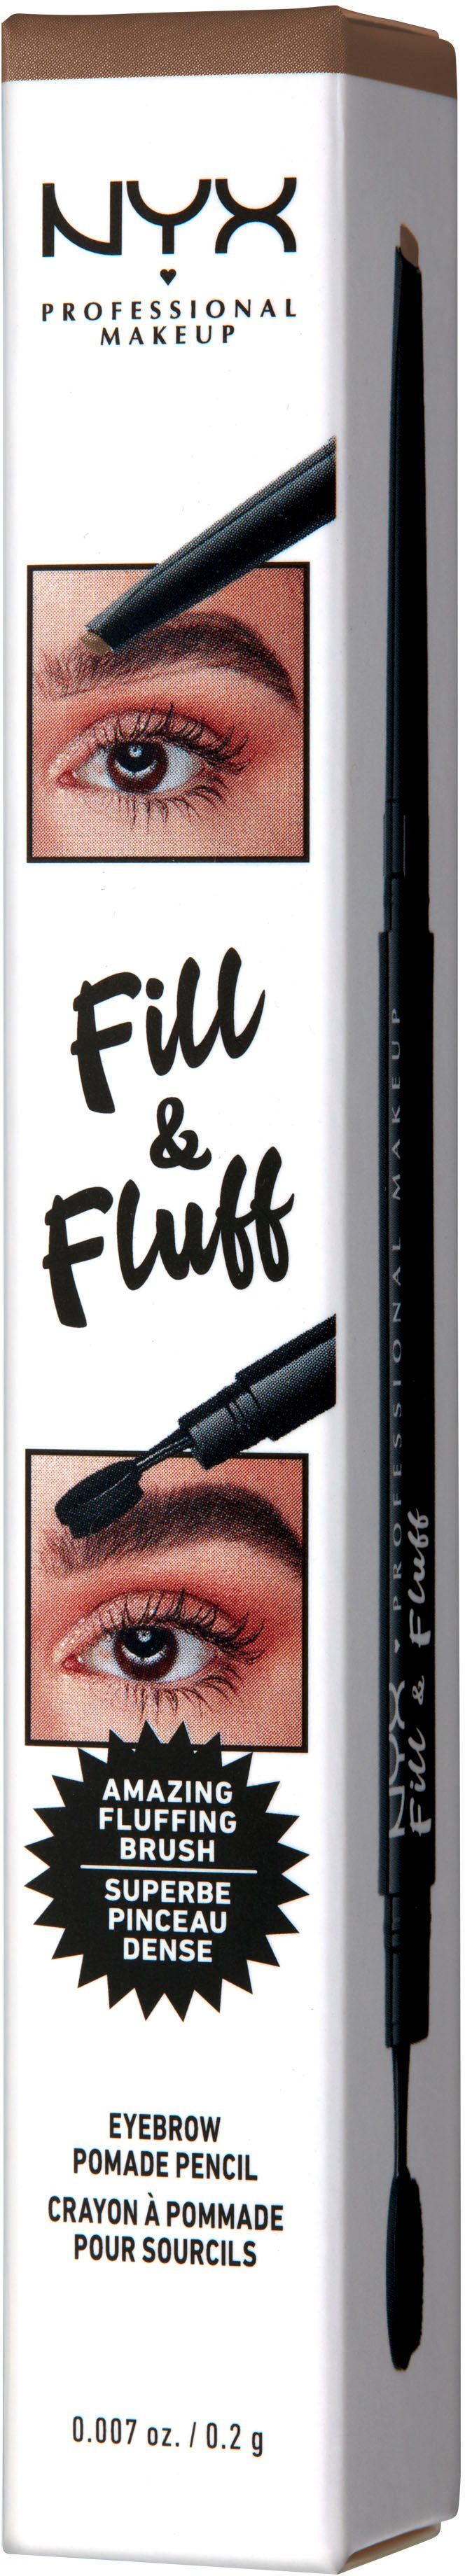 NYX Augenbrauen-Stift Professional Makeup Fill Fluff Pencil Pomade Eyebrow & taupe